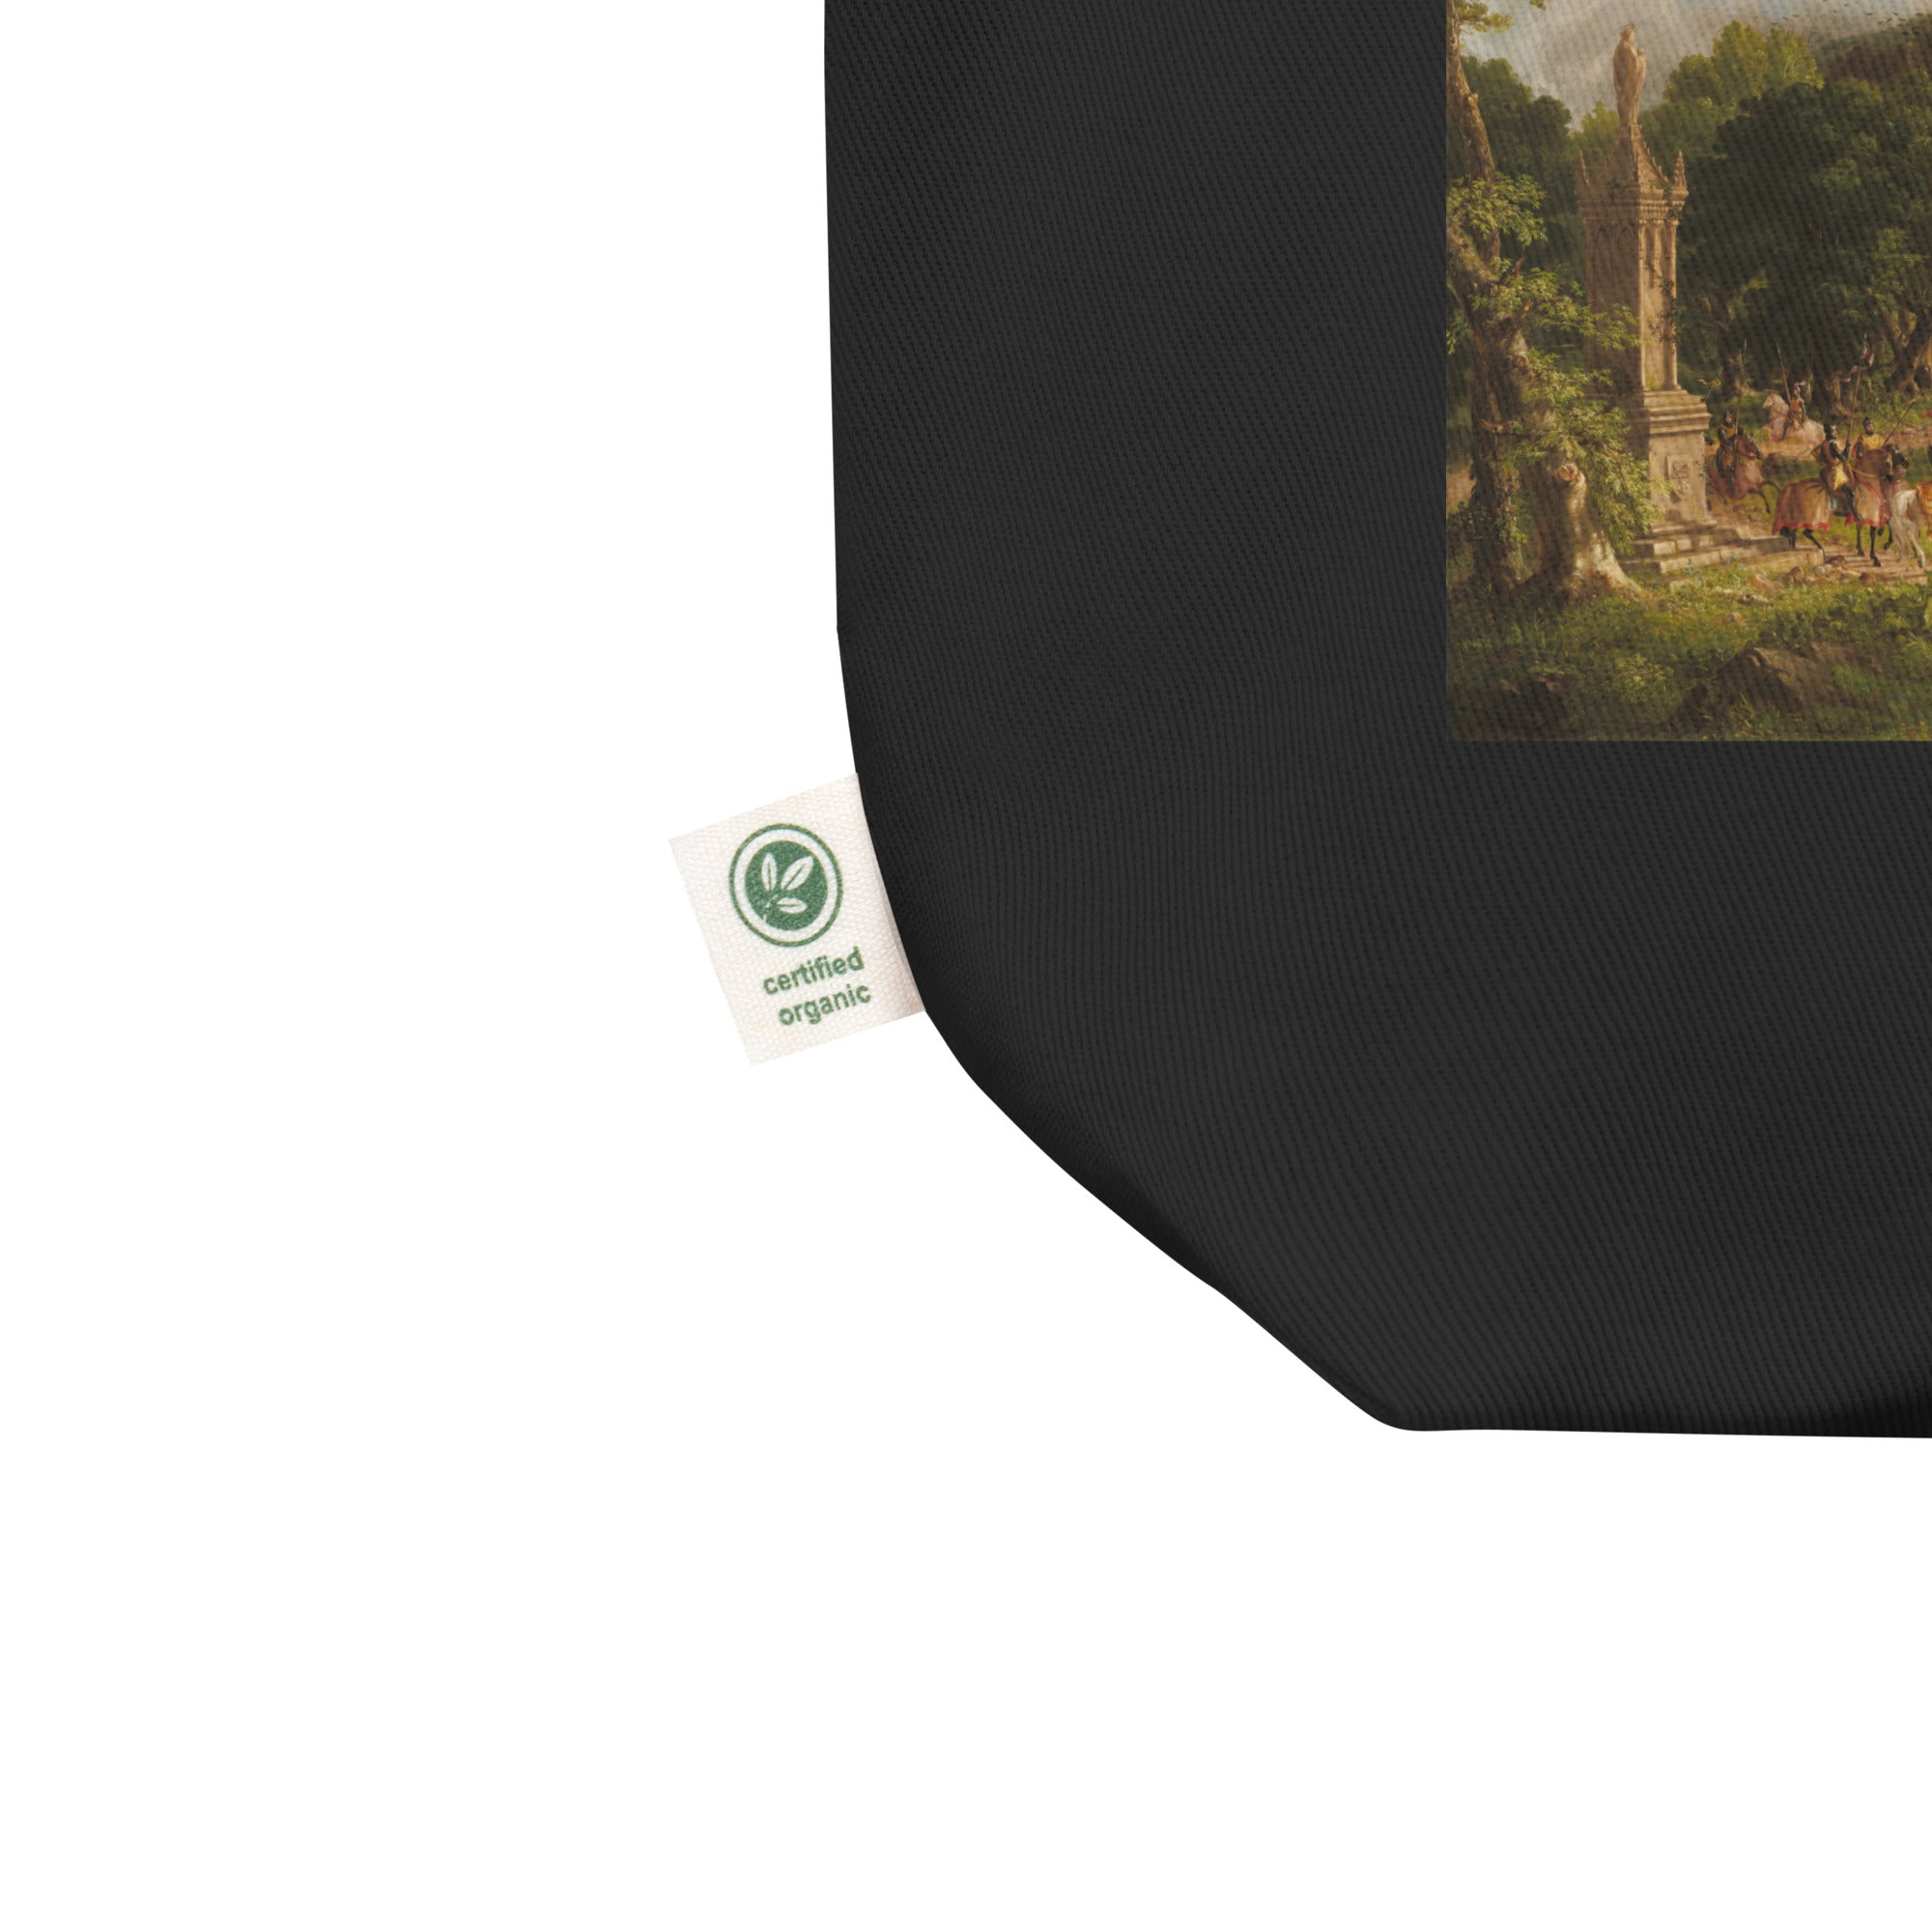 Thomas Cole 'The Departure' Famous Painting Totebag | Eco Friendly Art Tote Bag